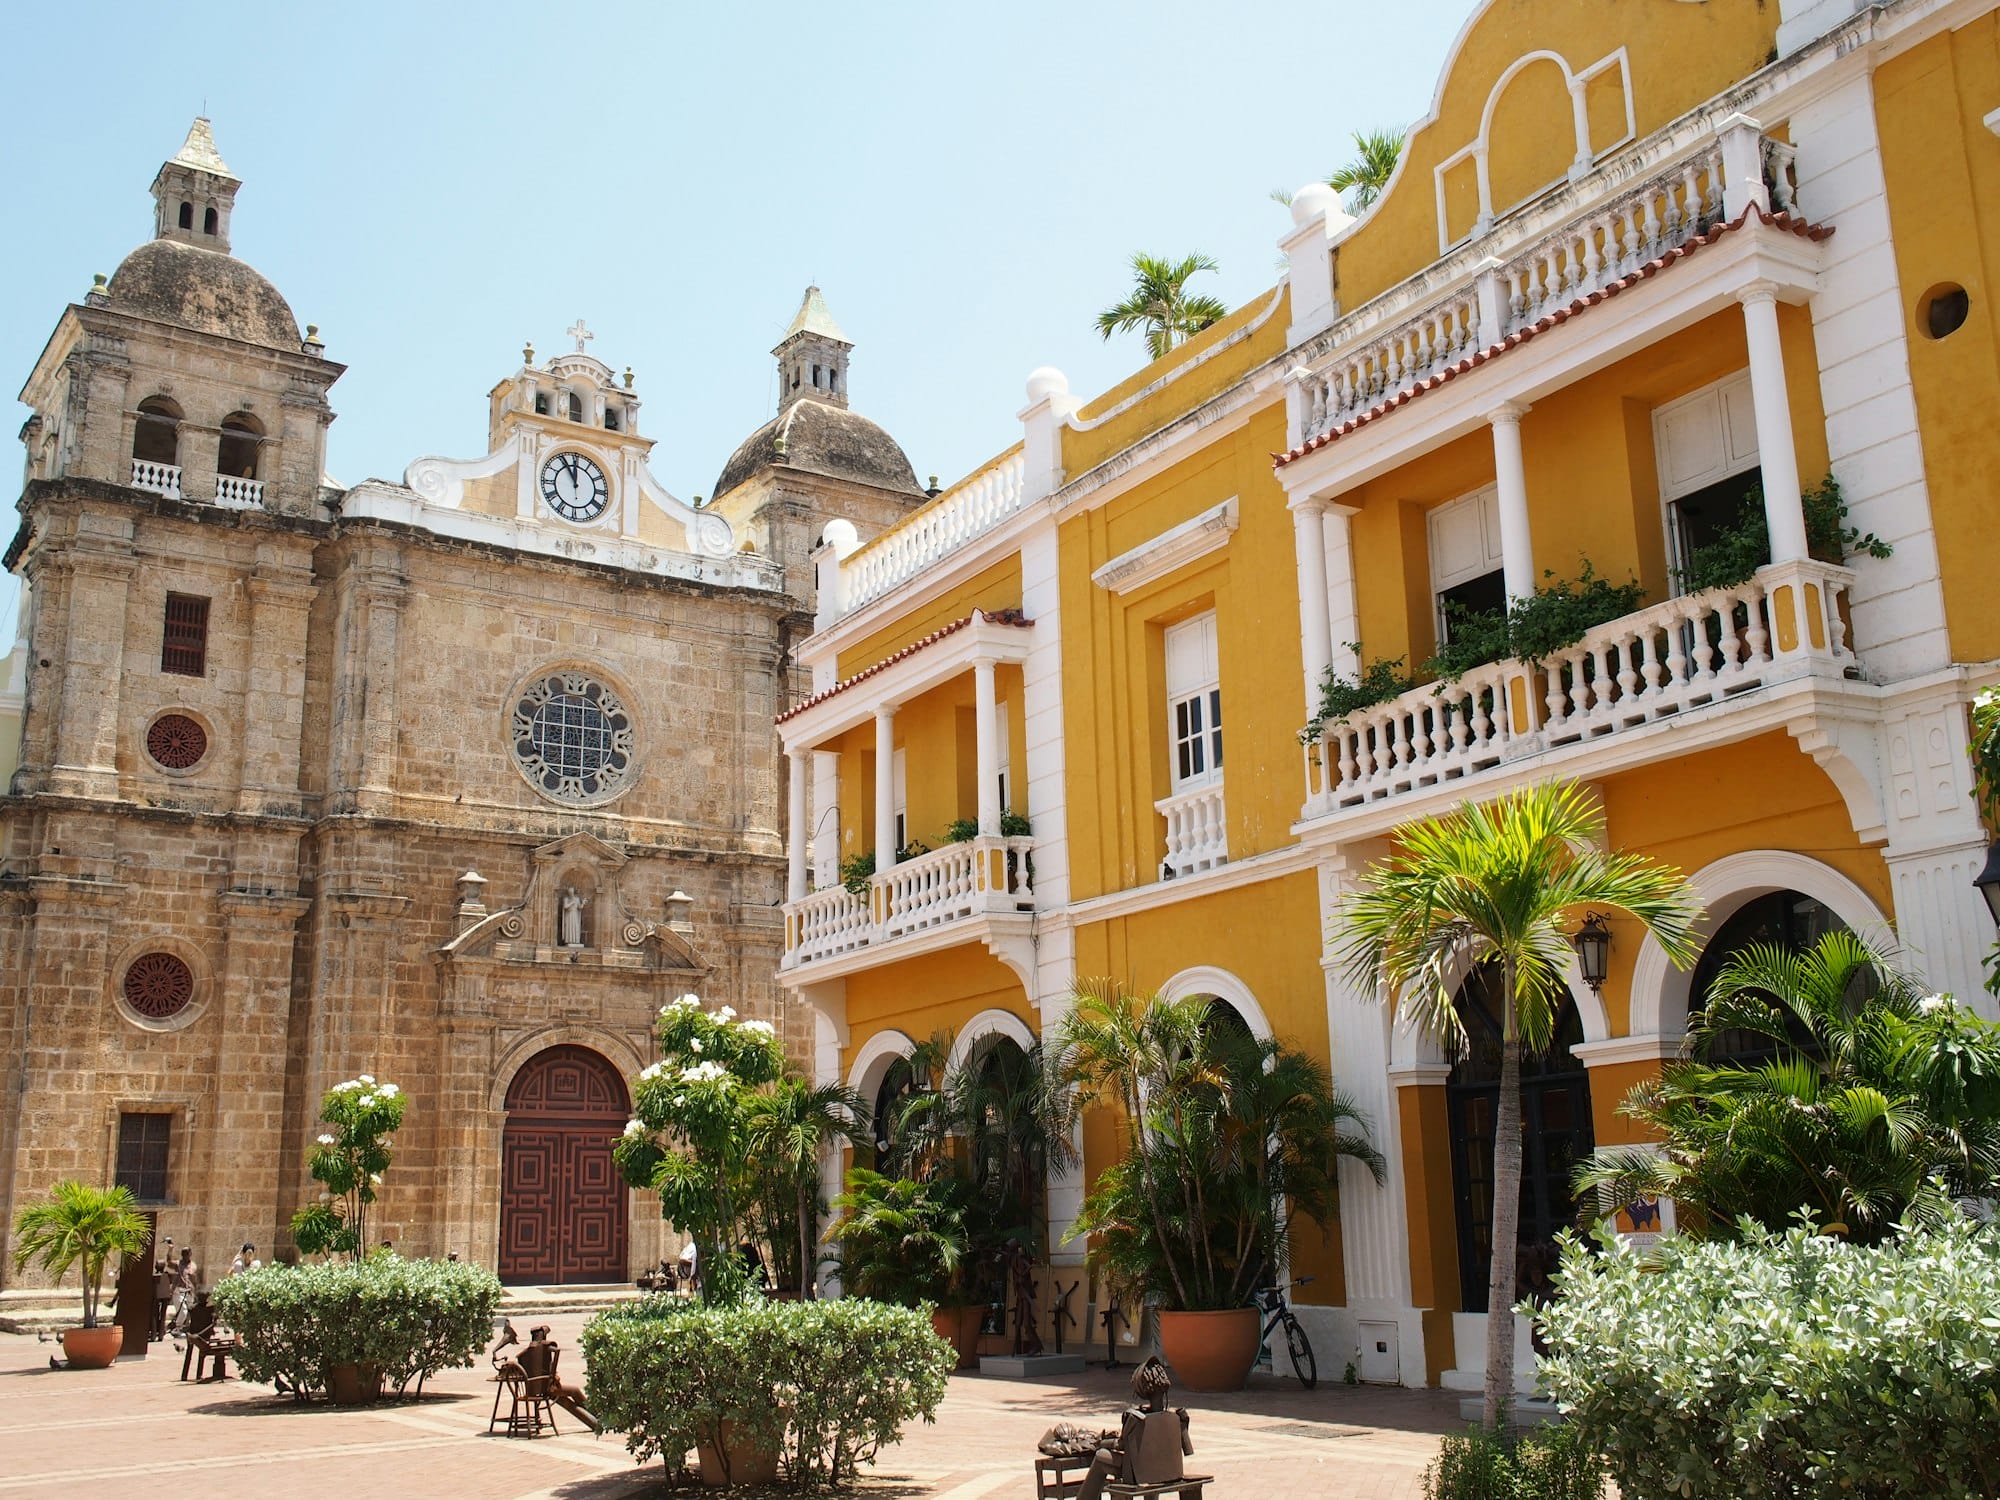 Church and a colonial building in the city of Cartagena, Colombia